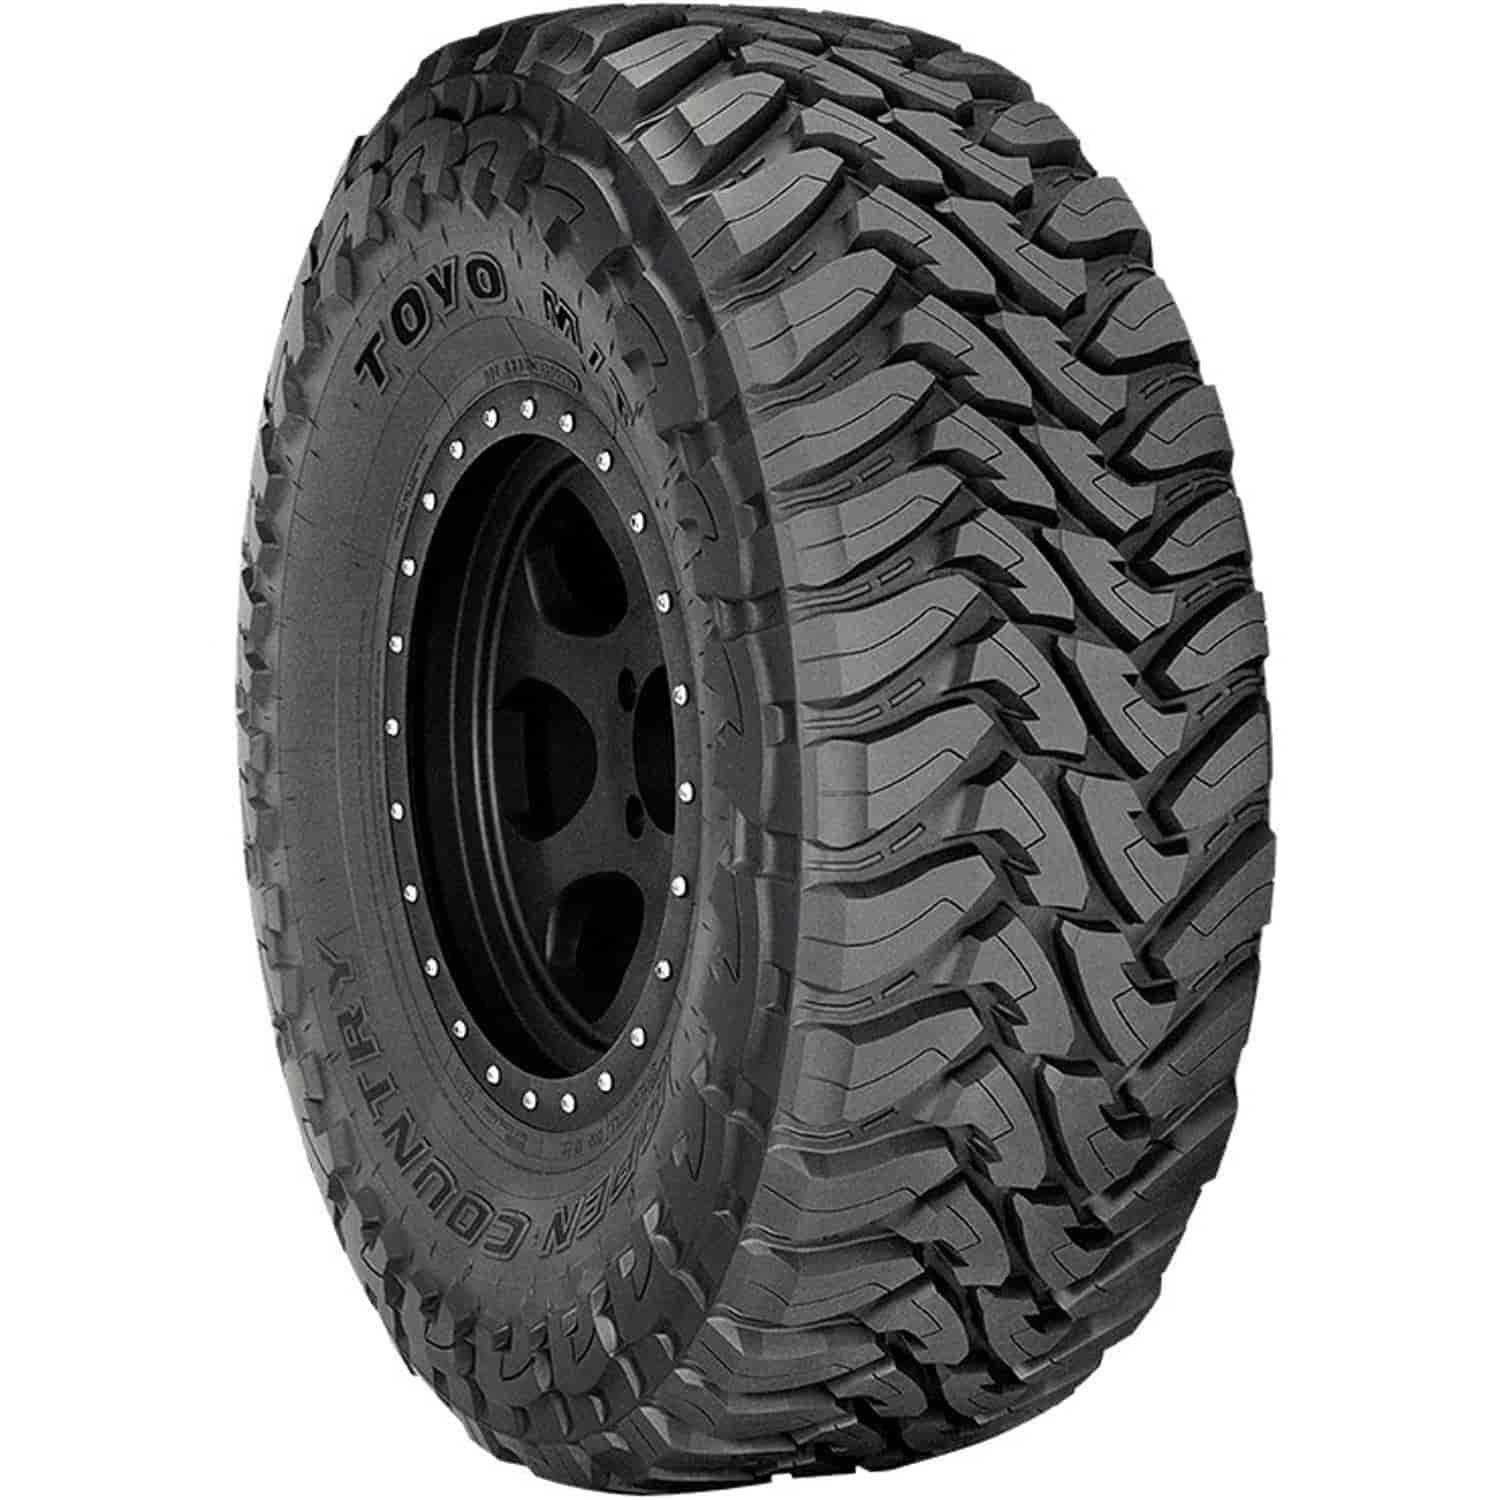 Open Country M/T LT295/70R18 129/126P E/10